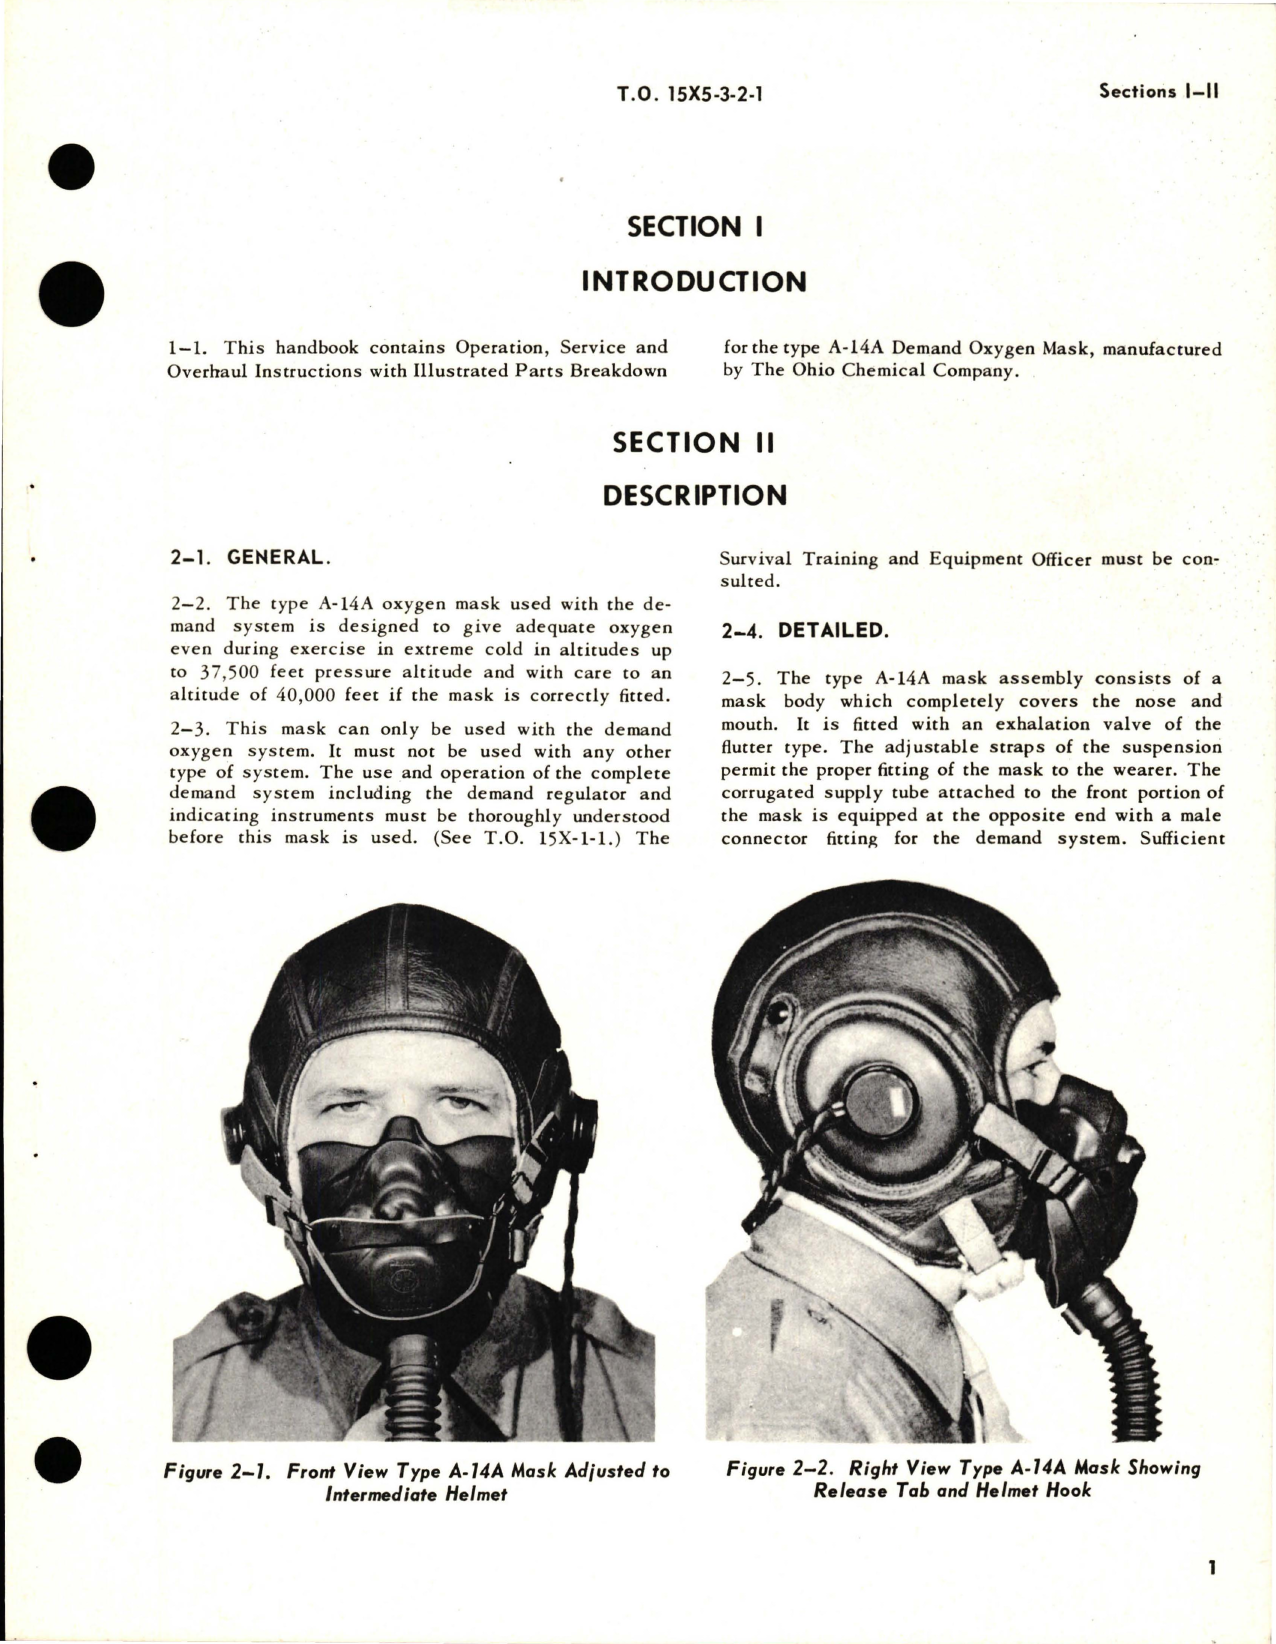 Sample page 5 from AirCorps Library document: Operation, Service and Overhaul Instructions with Illustrated Parts Breakdown for Demand Oxygen Mask - Type A-14A